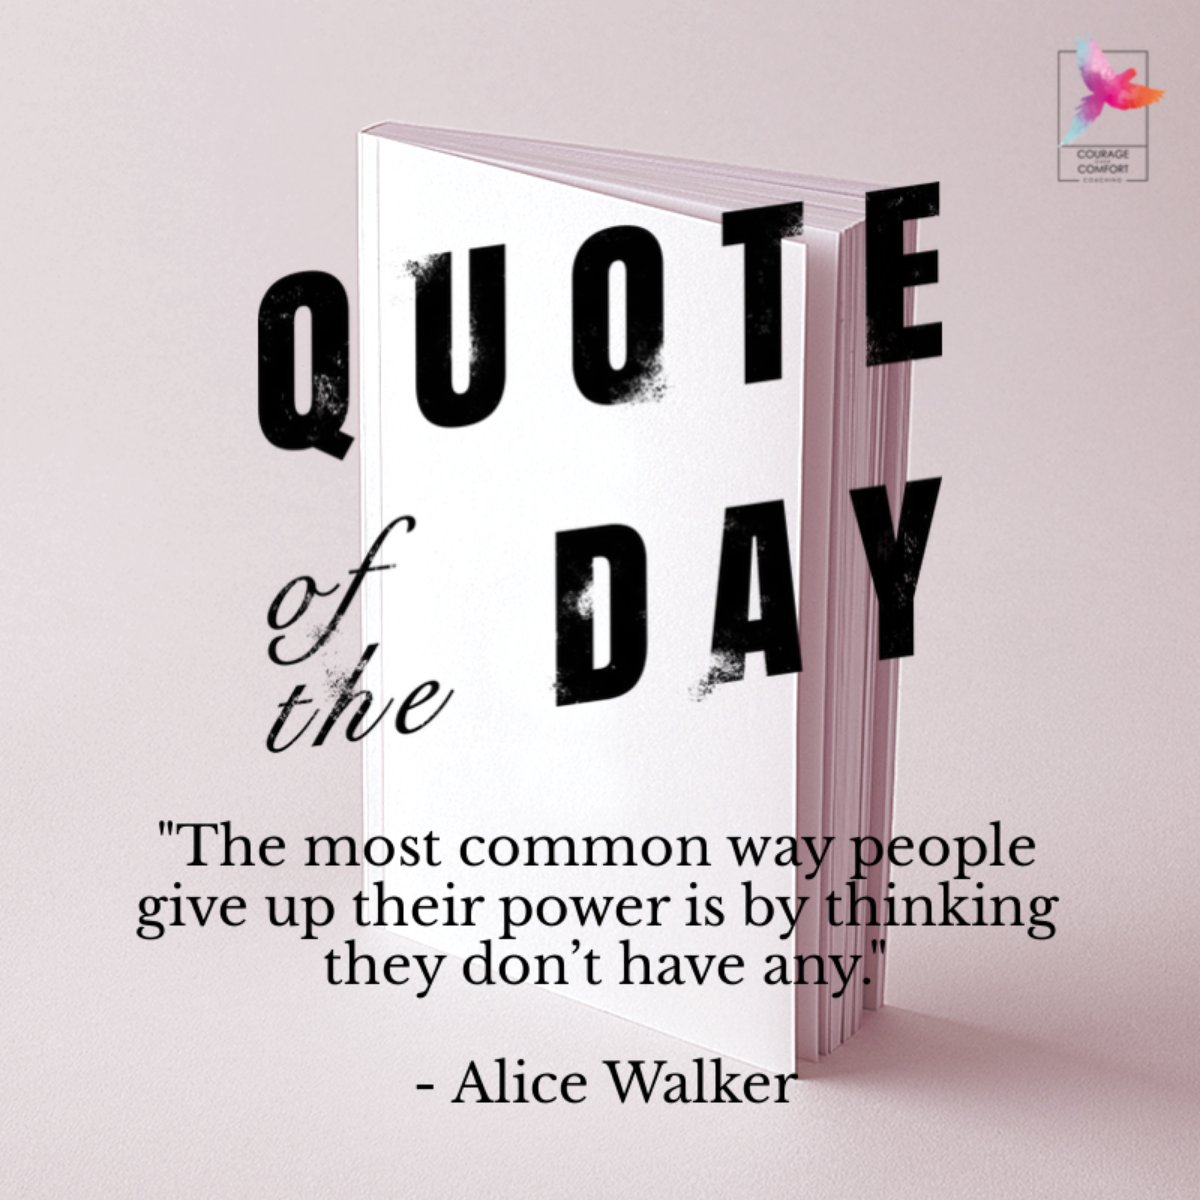 Believe in your ability to shape your own life. Let's make this Monday a catalyst for self-empowerment! #mondaymotivation #alicewalker #quotes #mondaymindset #motivationmonday #mondayinspiration #executivecoaching #leadershipcoaching #lifecoaching #courageovercomfortcoaching